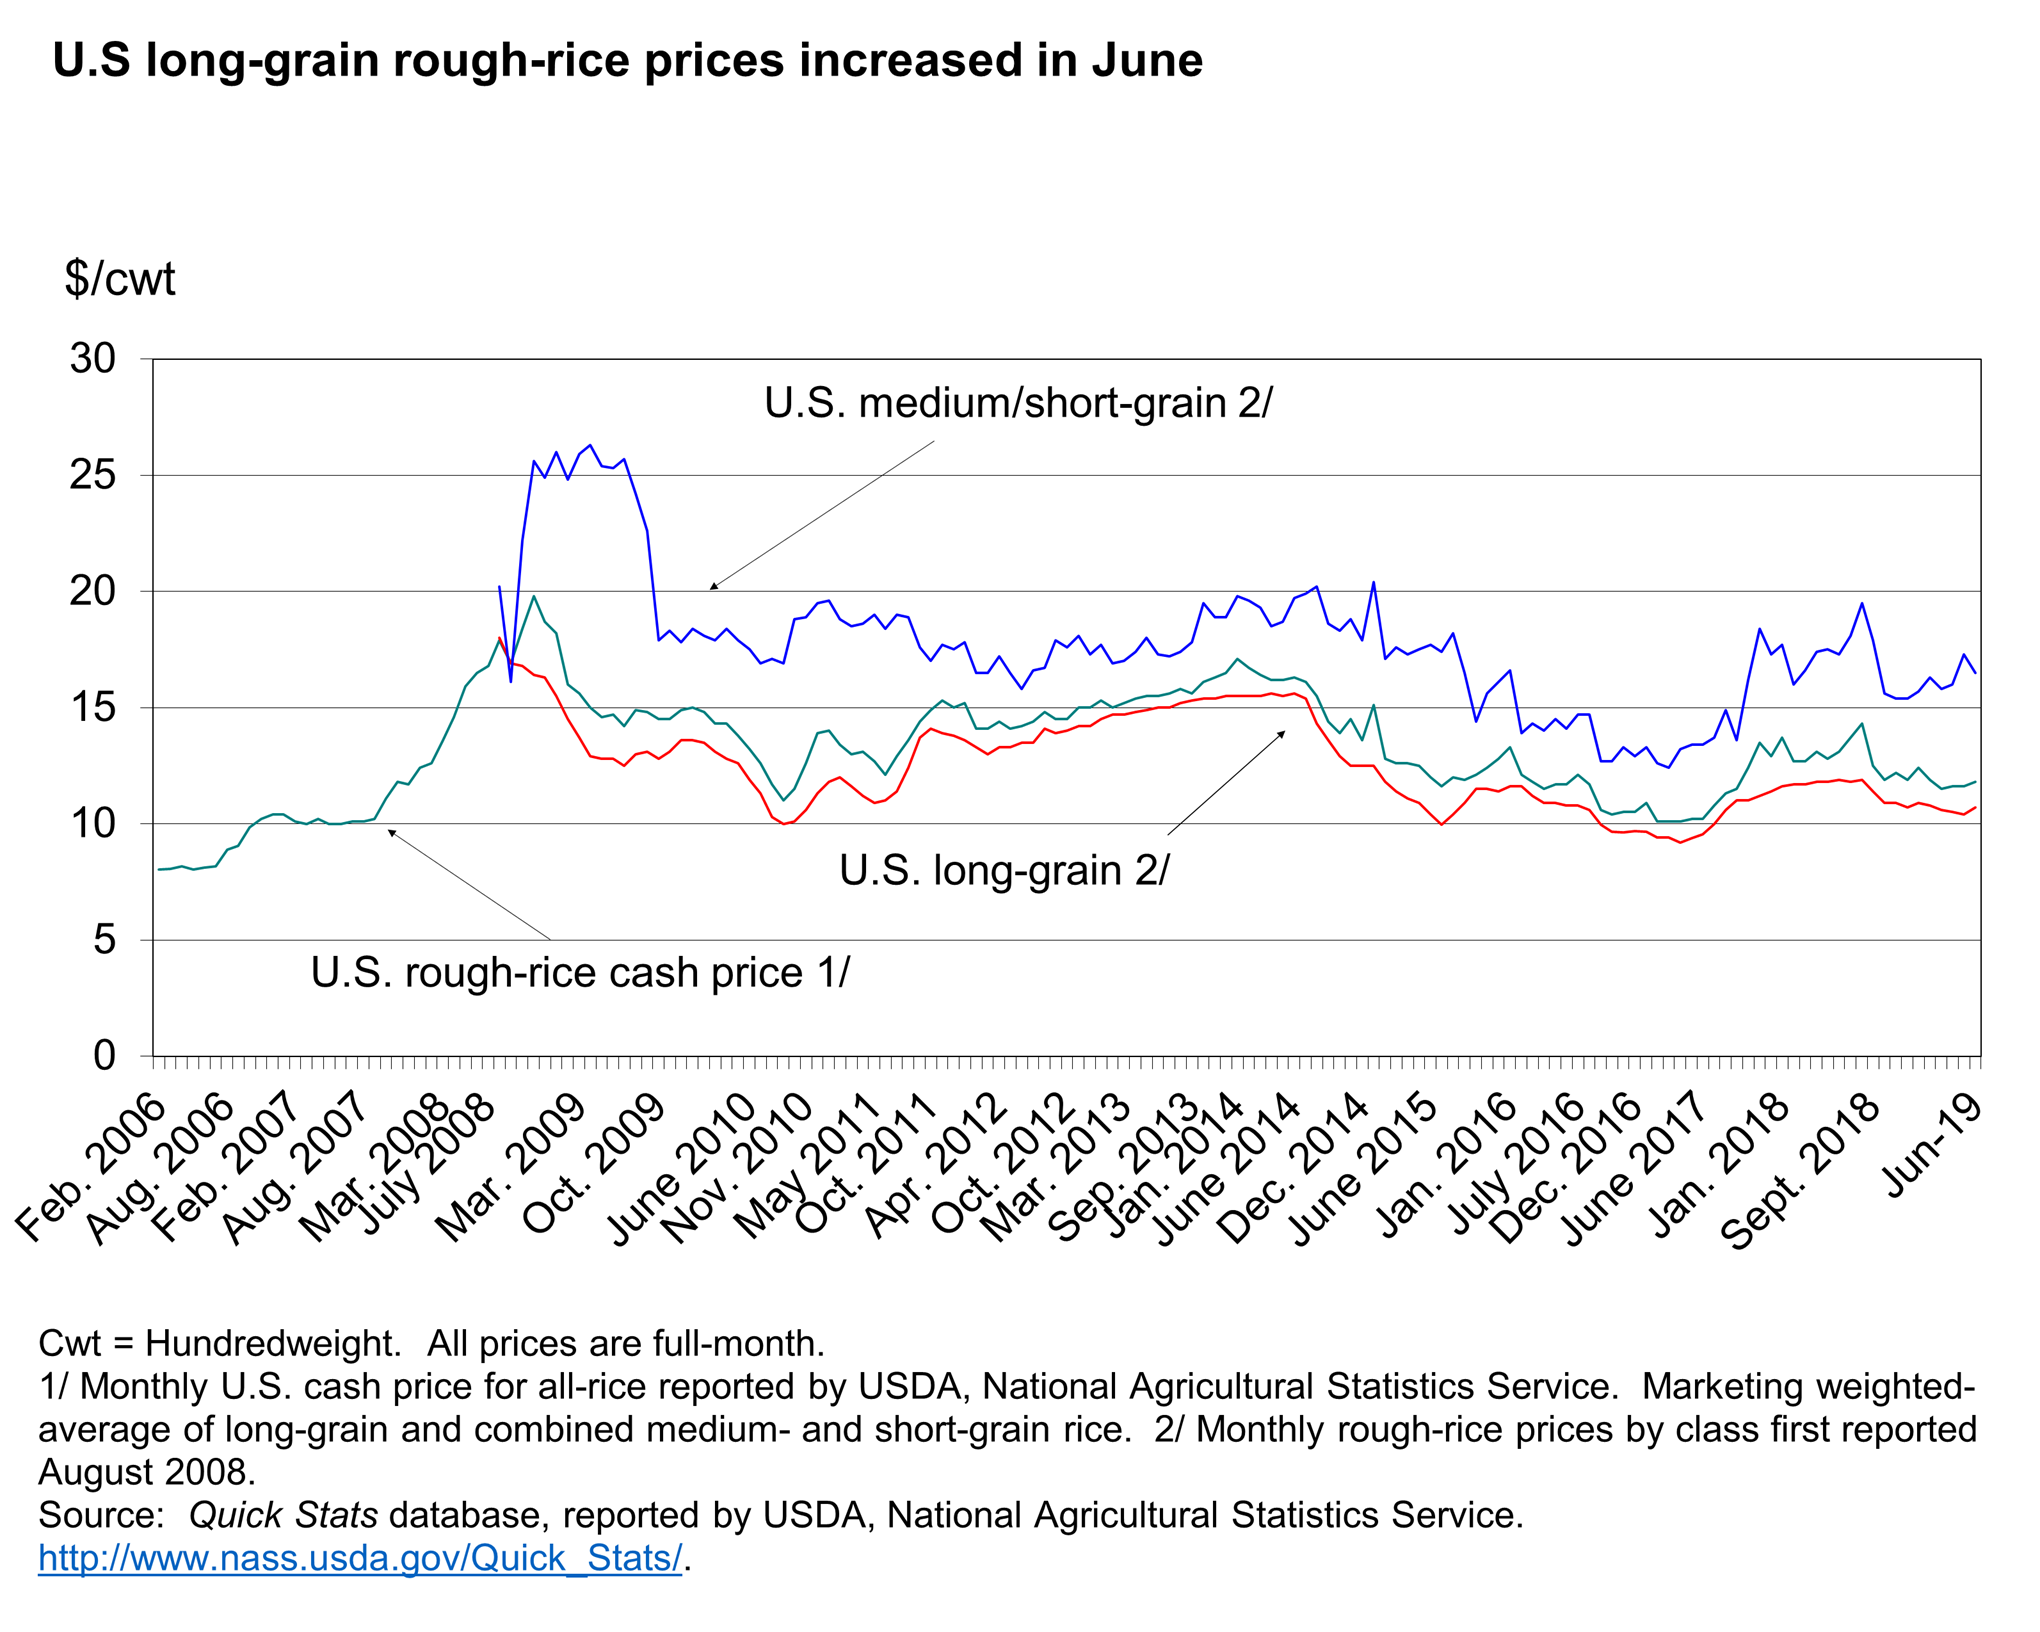 Monthly Rice Price Chart